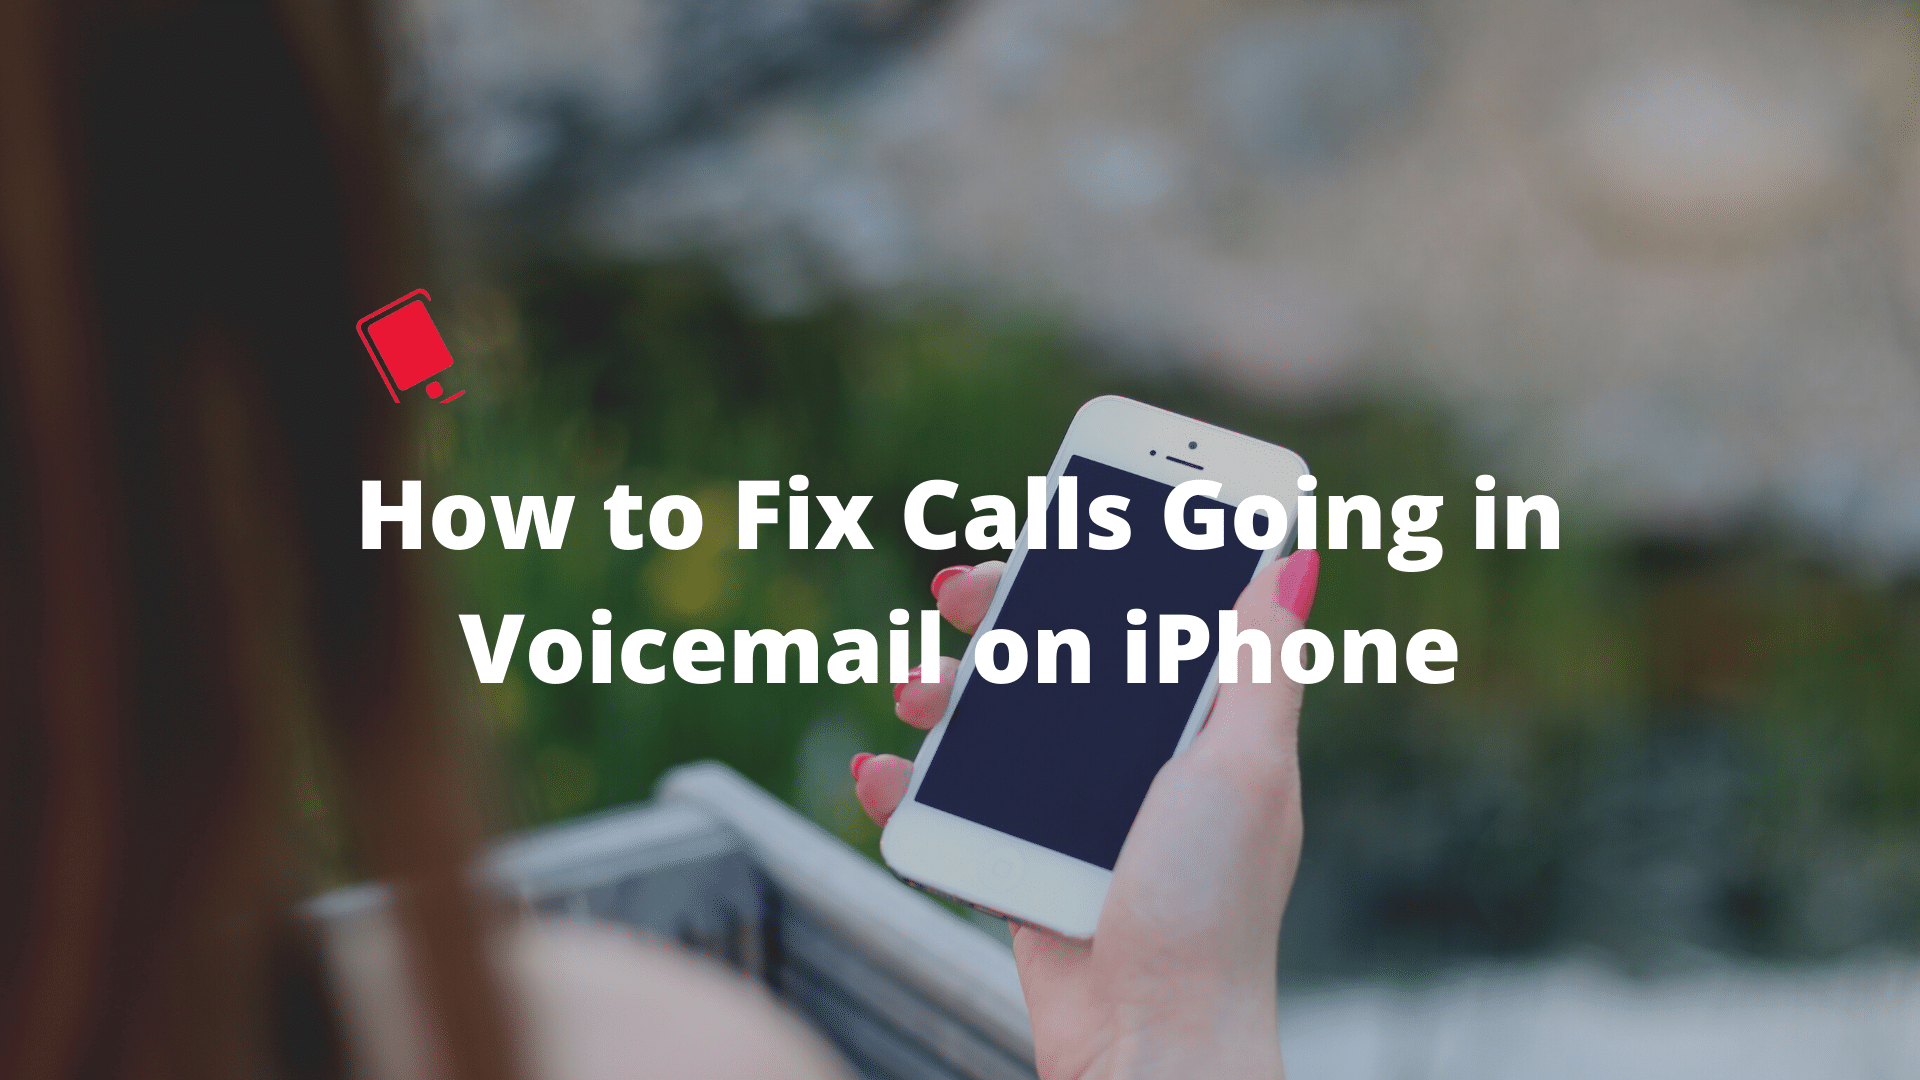 iPhone calls going in voicemail